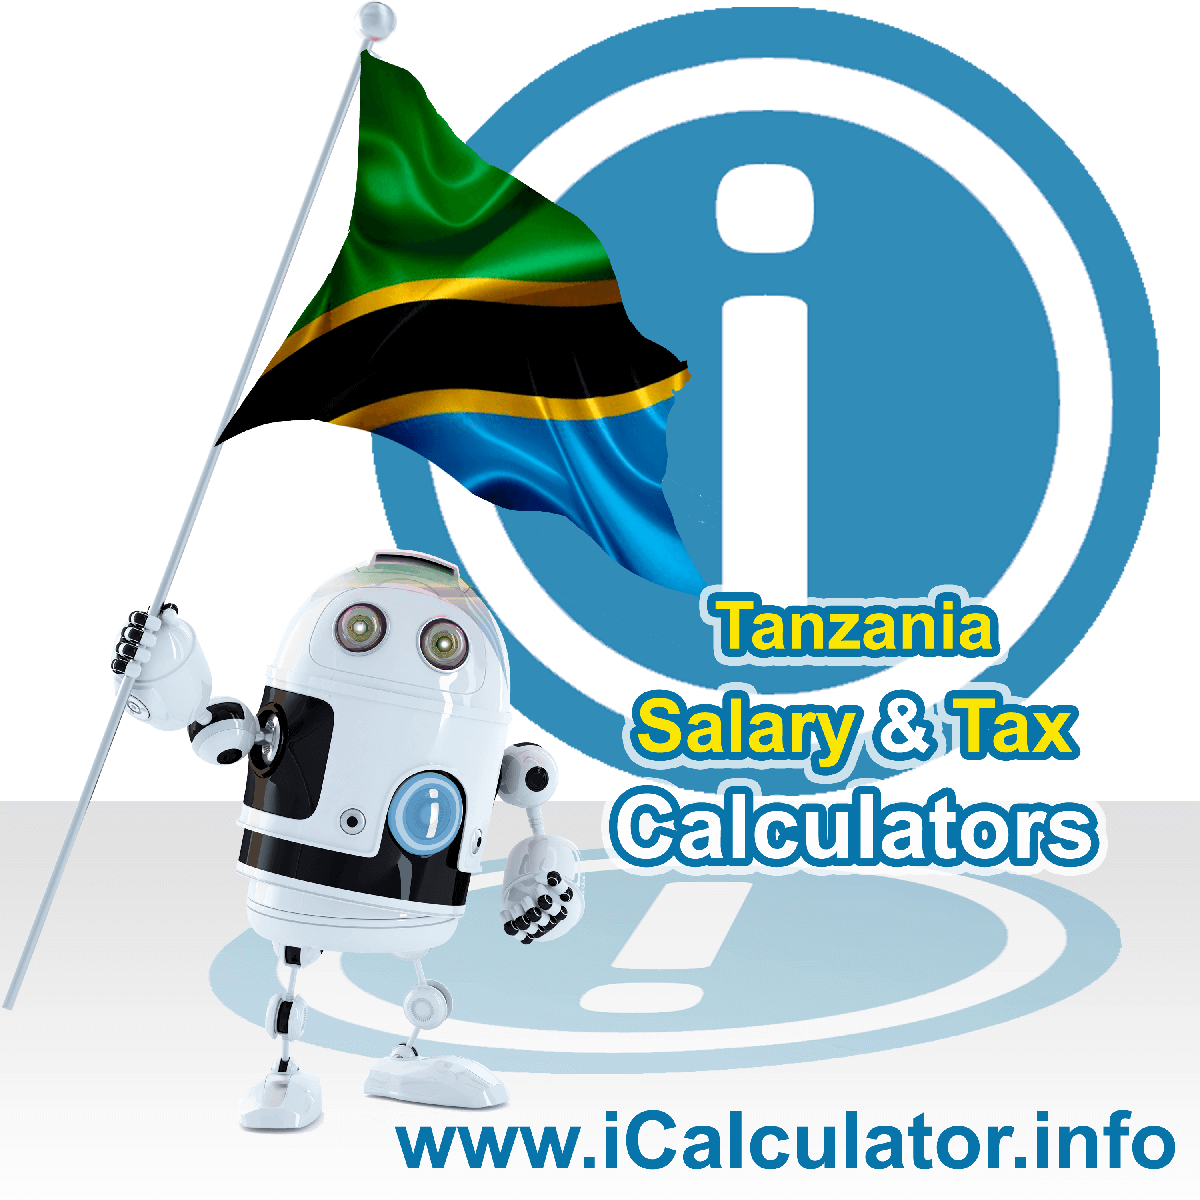 Tanzania Wage Calculator. This image shows the Tanzania flag and information relating to the tax formula for the Tanzania Tax Calculator